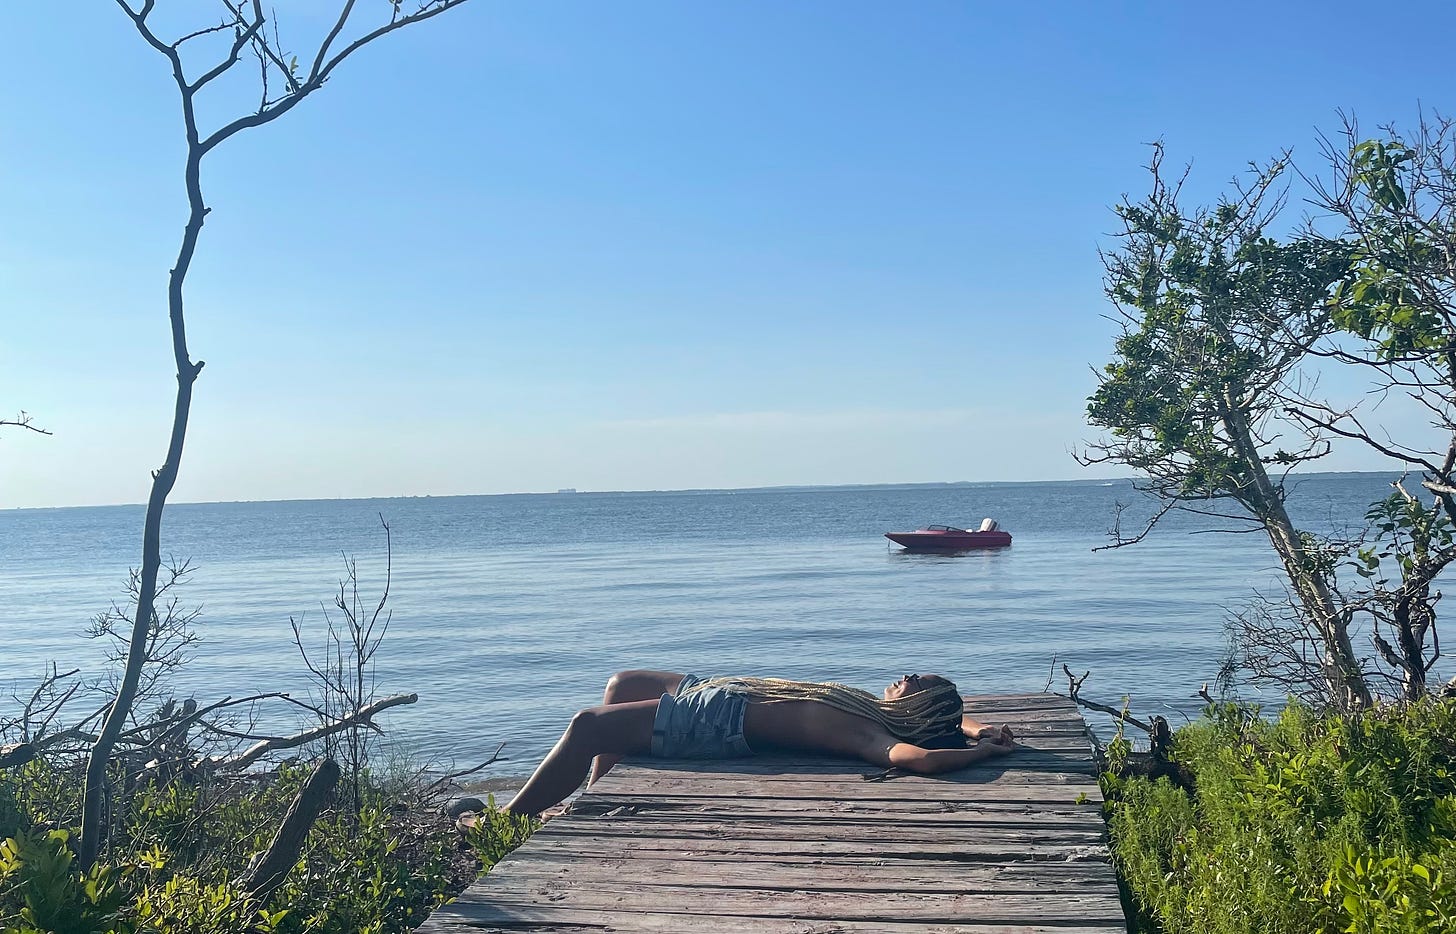 Me laying on a wooden dock surrounded by small trees, with a boat on the water in the distance.